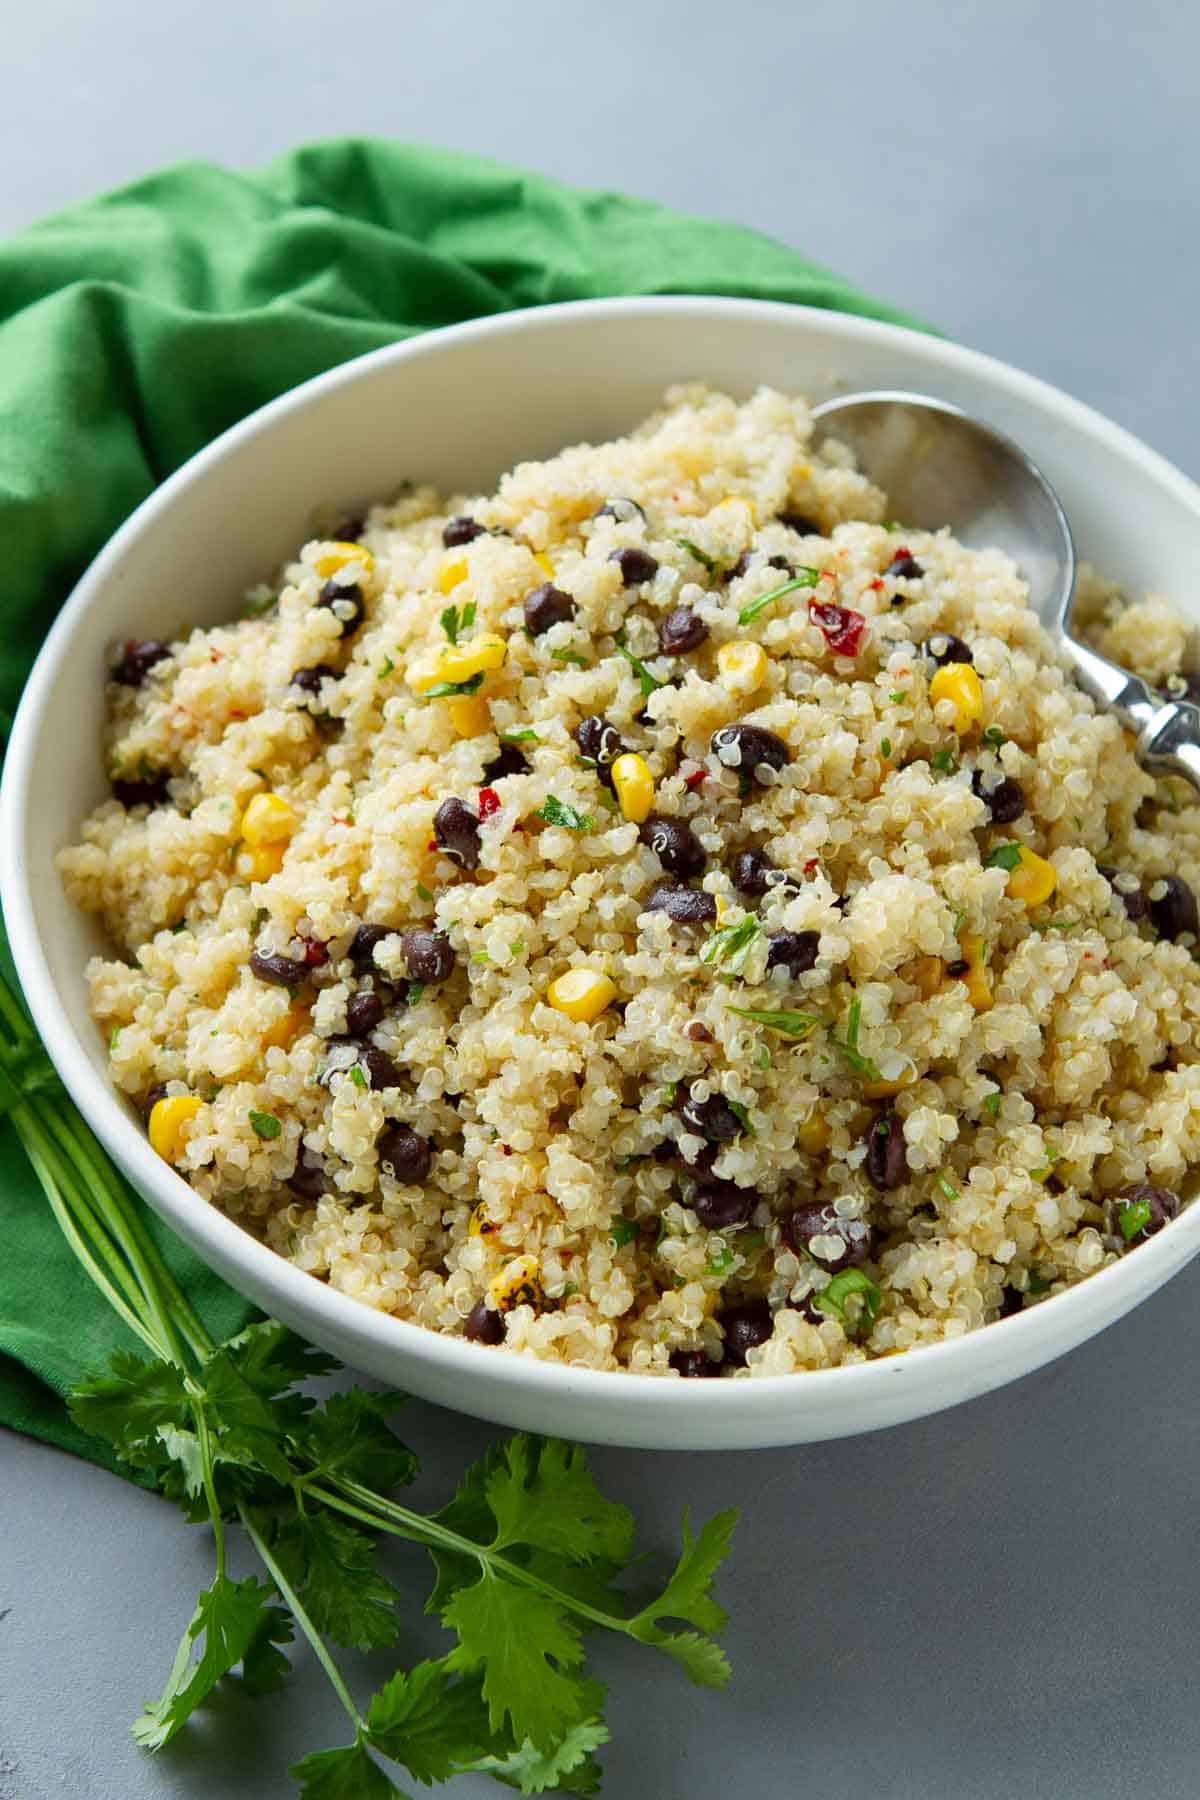 Spice up your outdoor gatherings with this mouthwatering southwest quinoa salad, featuring black beans, corn, and a zesty lime juice dressing. | Recipes | Plant-based | WFPB | Vegan